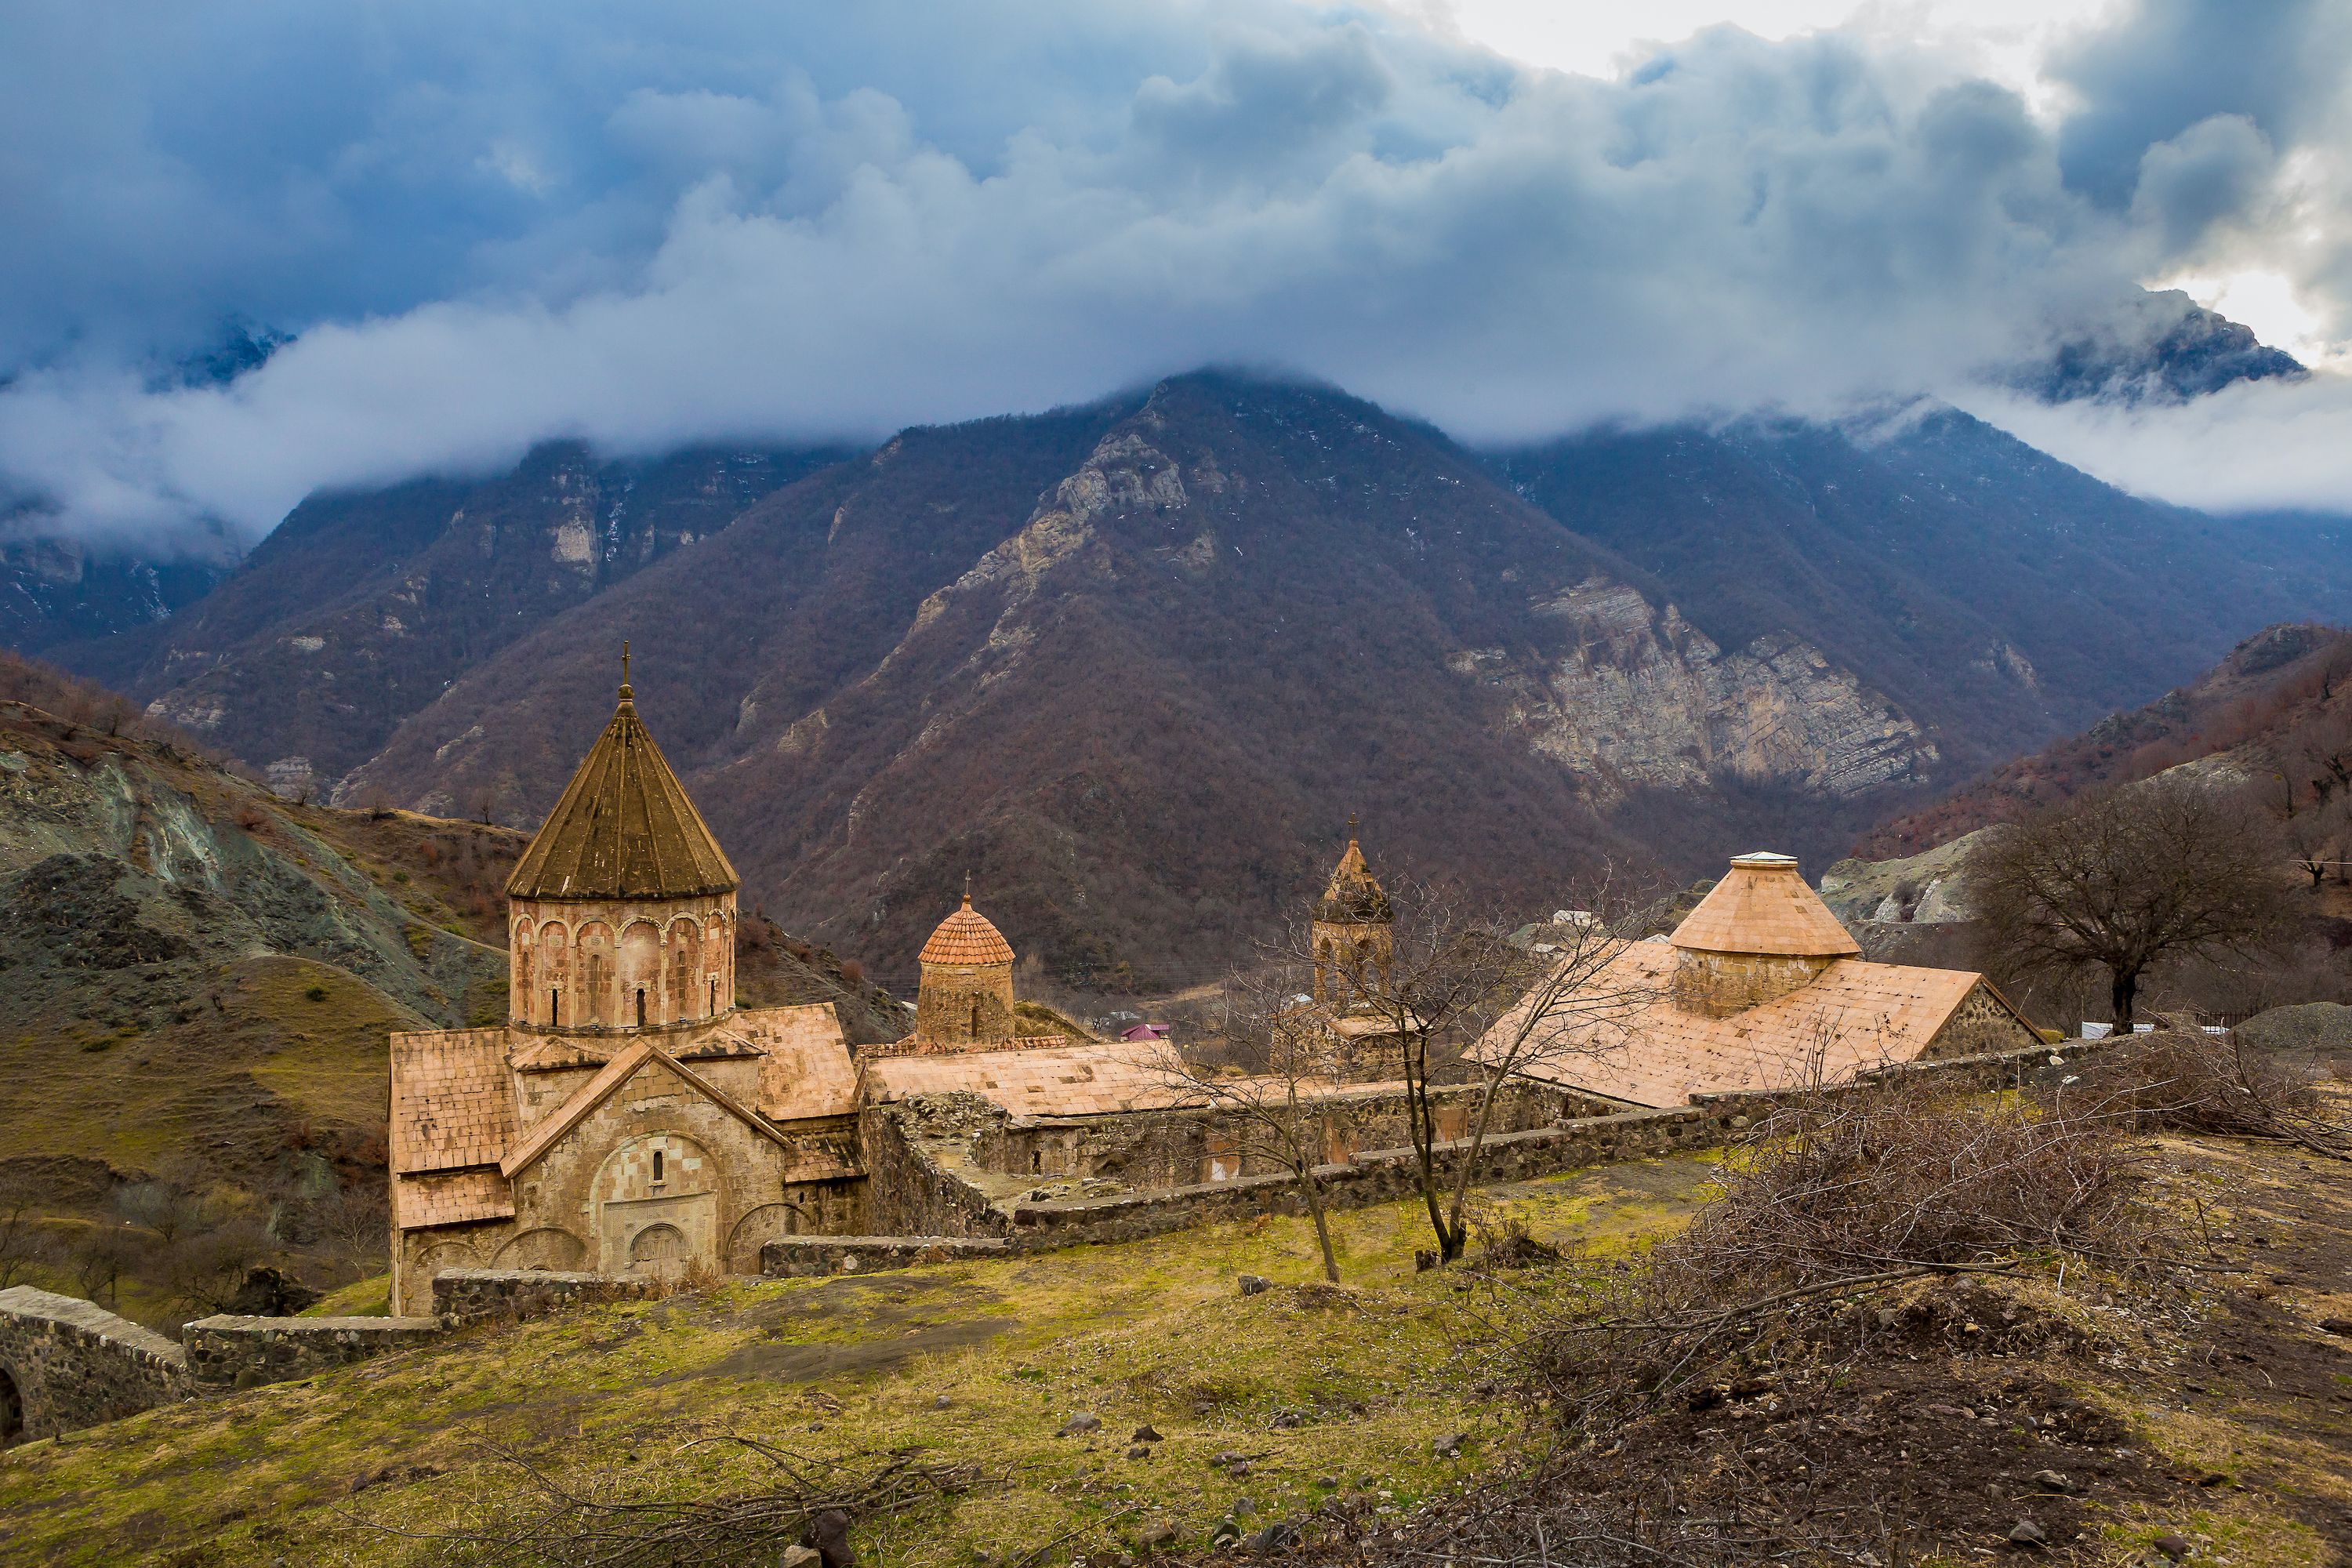 A view of the Dadivank Monastery, the fate of which has become an impassioned issue for Armenians in the handover of the Kelbajar region to Azerbaijan. Image by Hayk Hovhannisyan / Shutterstock. Undated.